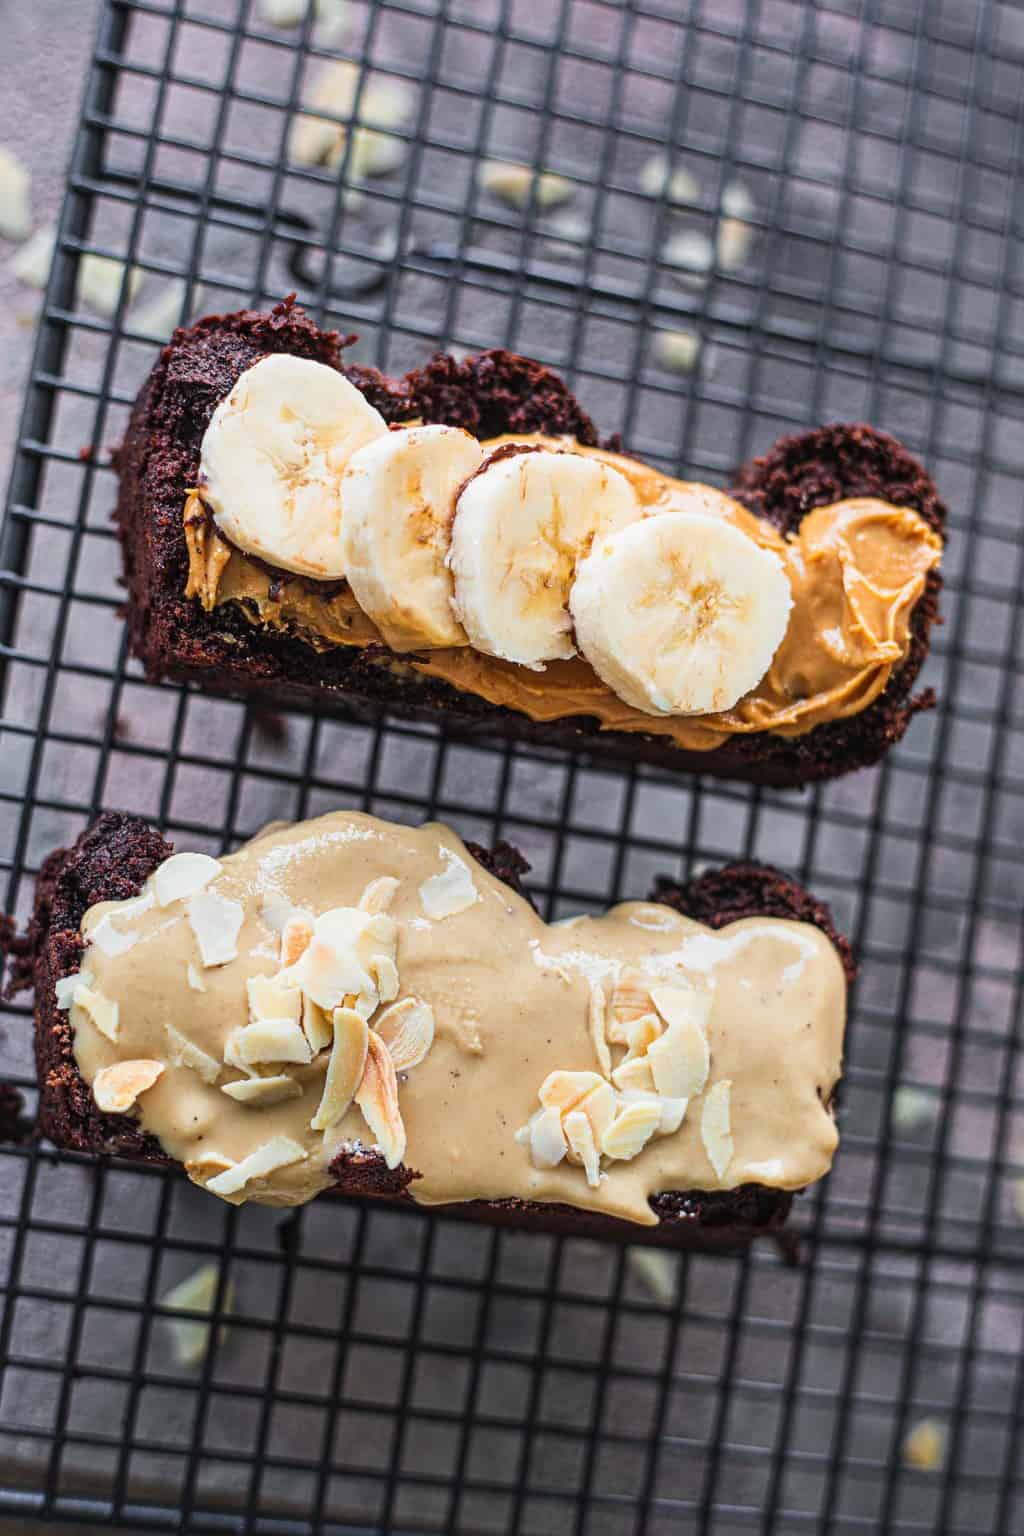 Two slices of vegan banana bread with peanut butter and tahini